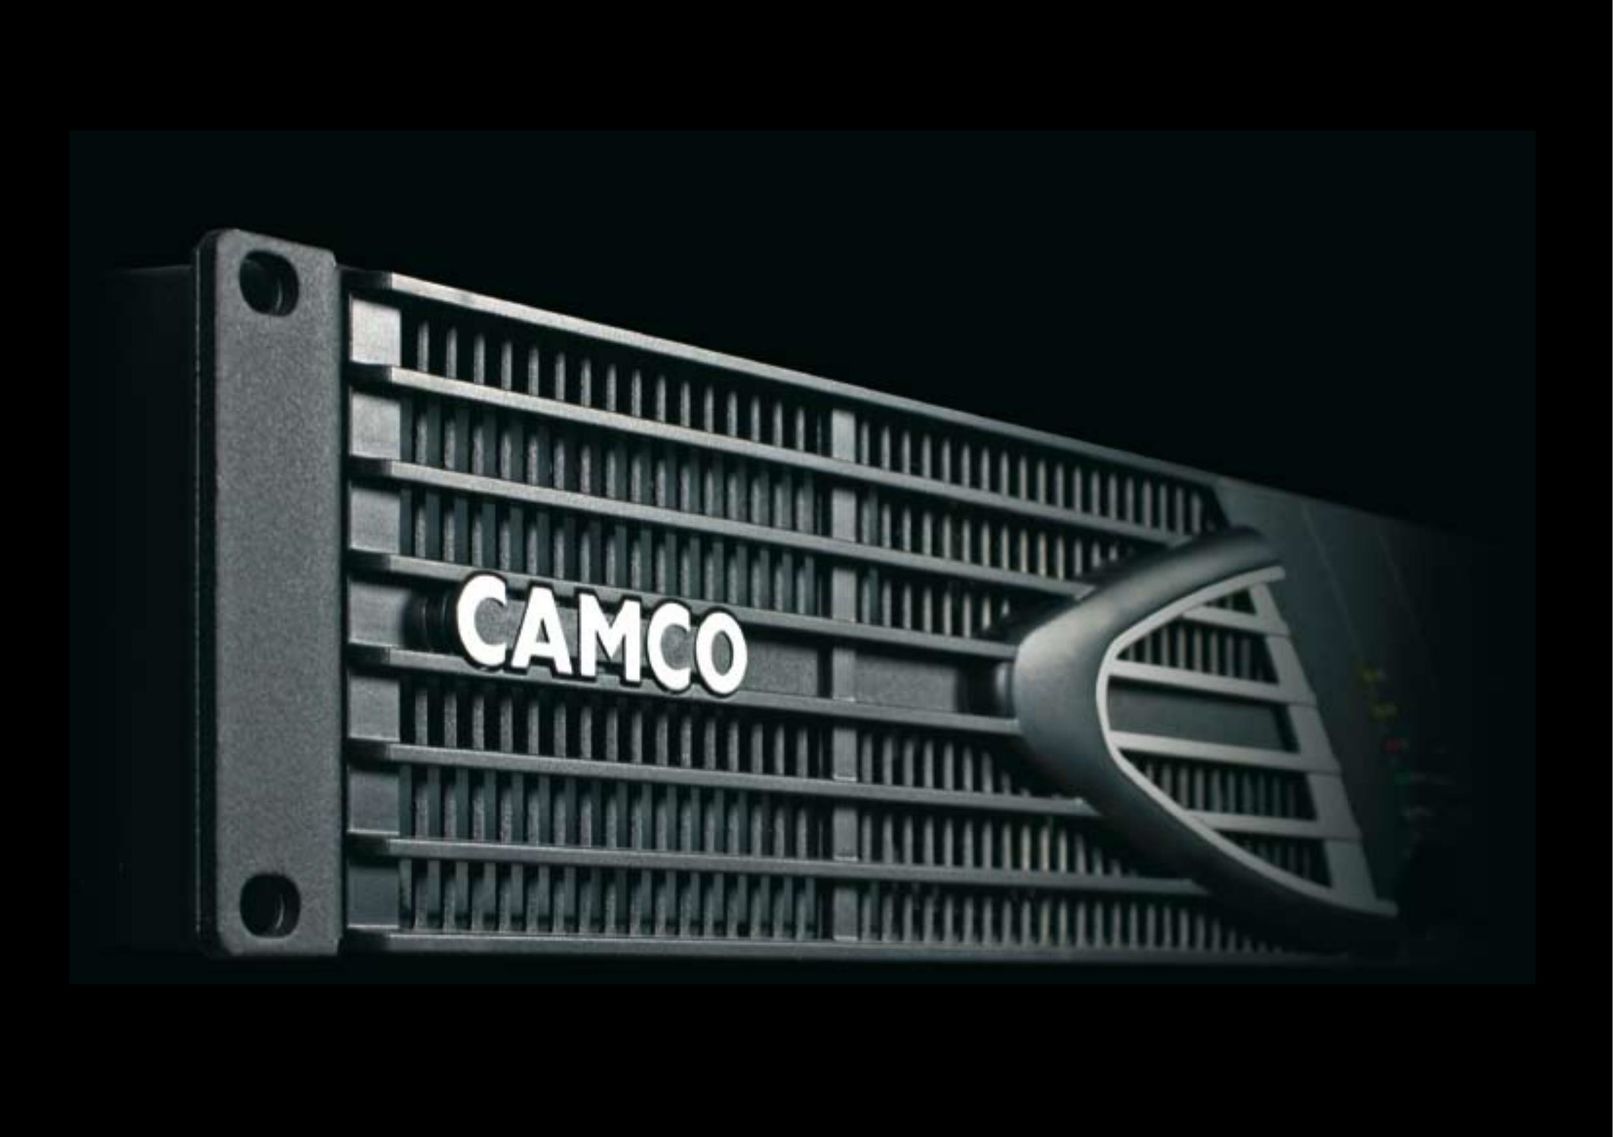 Camco P.3 Series Stereo Amplifier User Manual